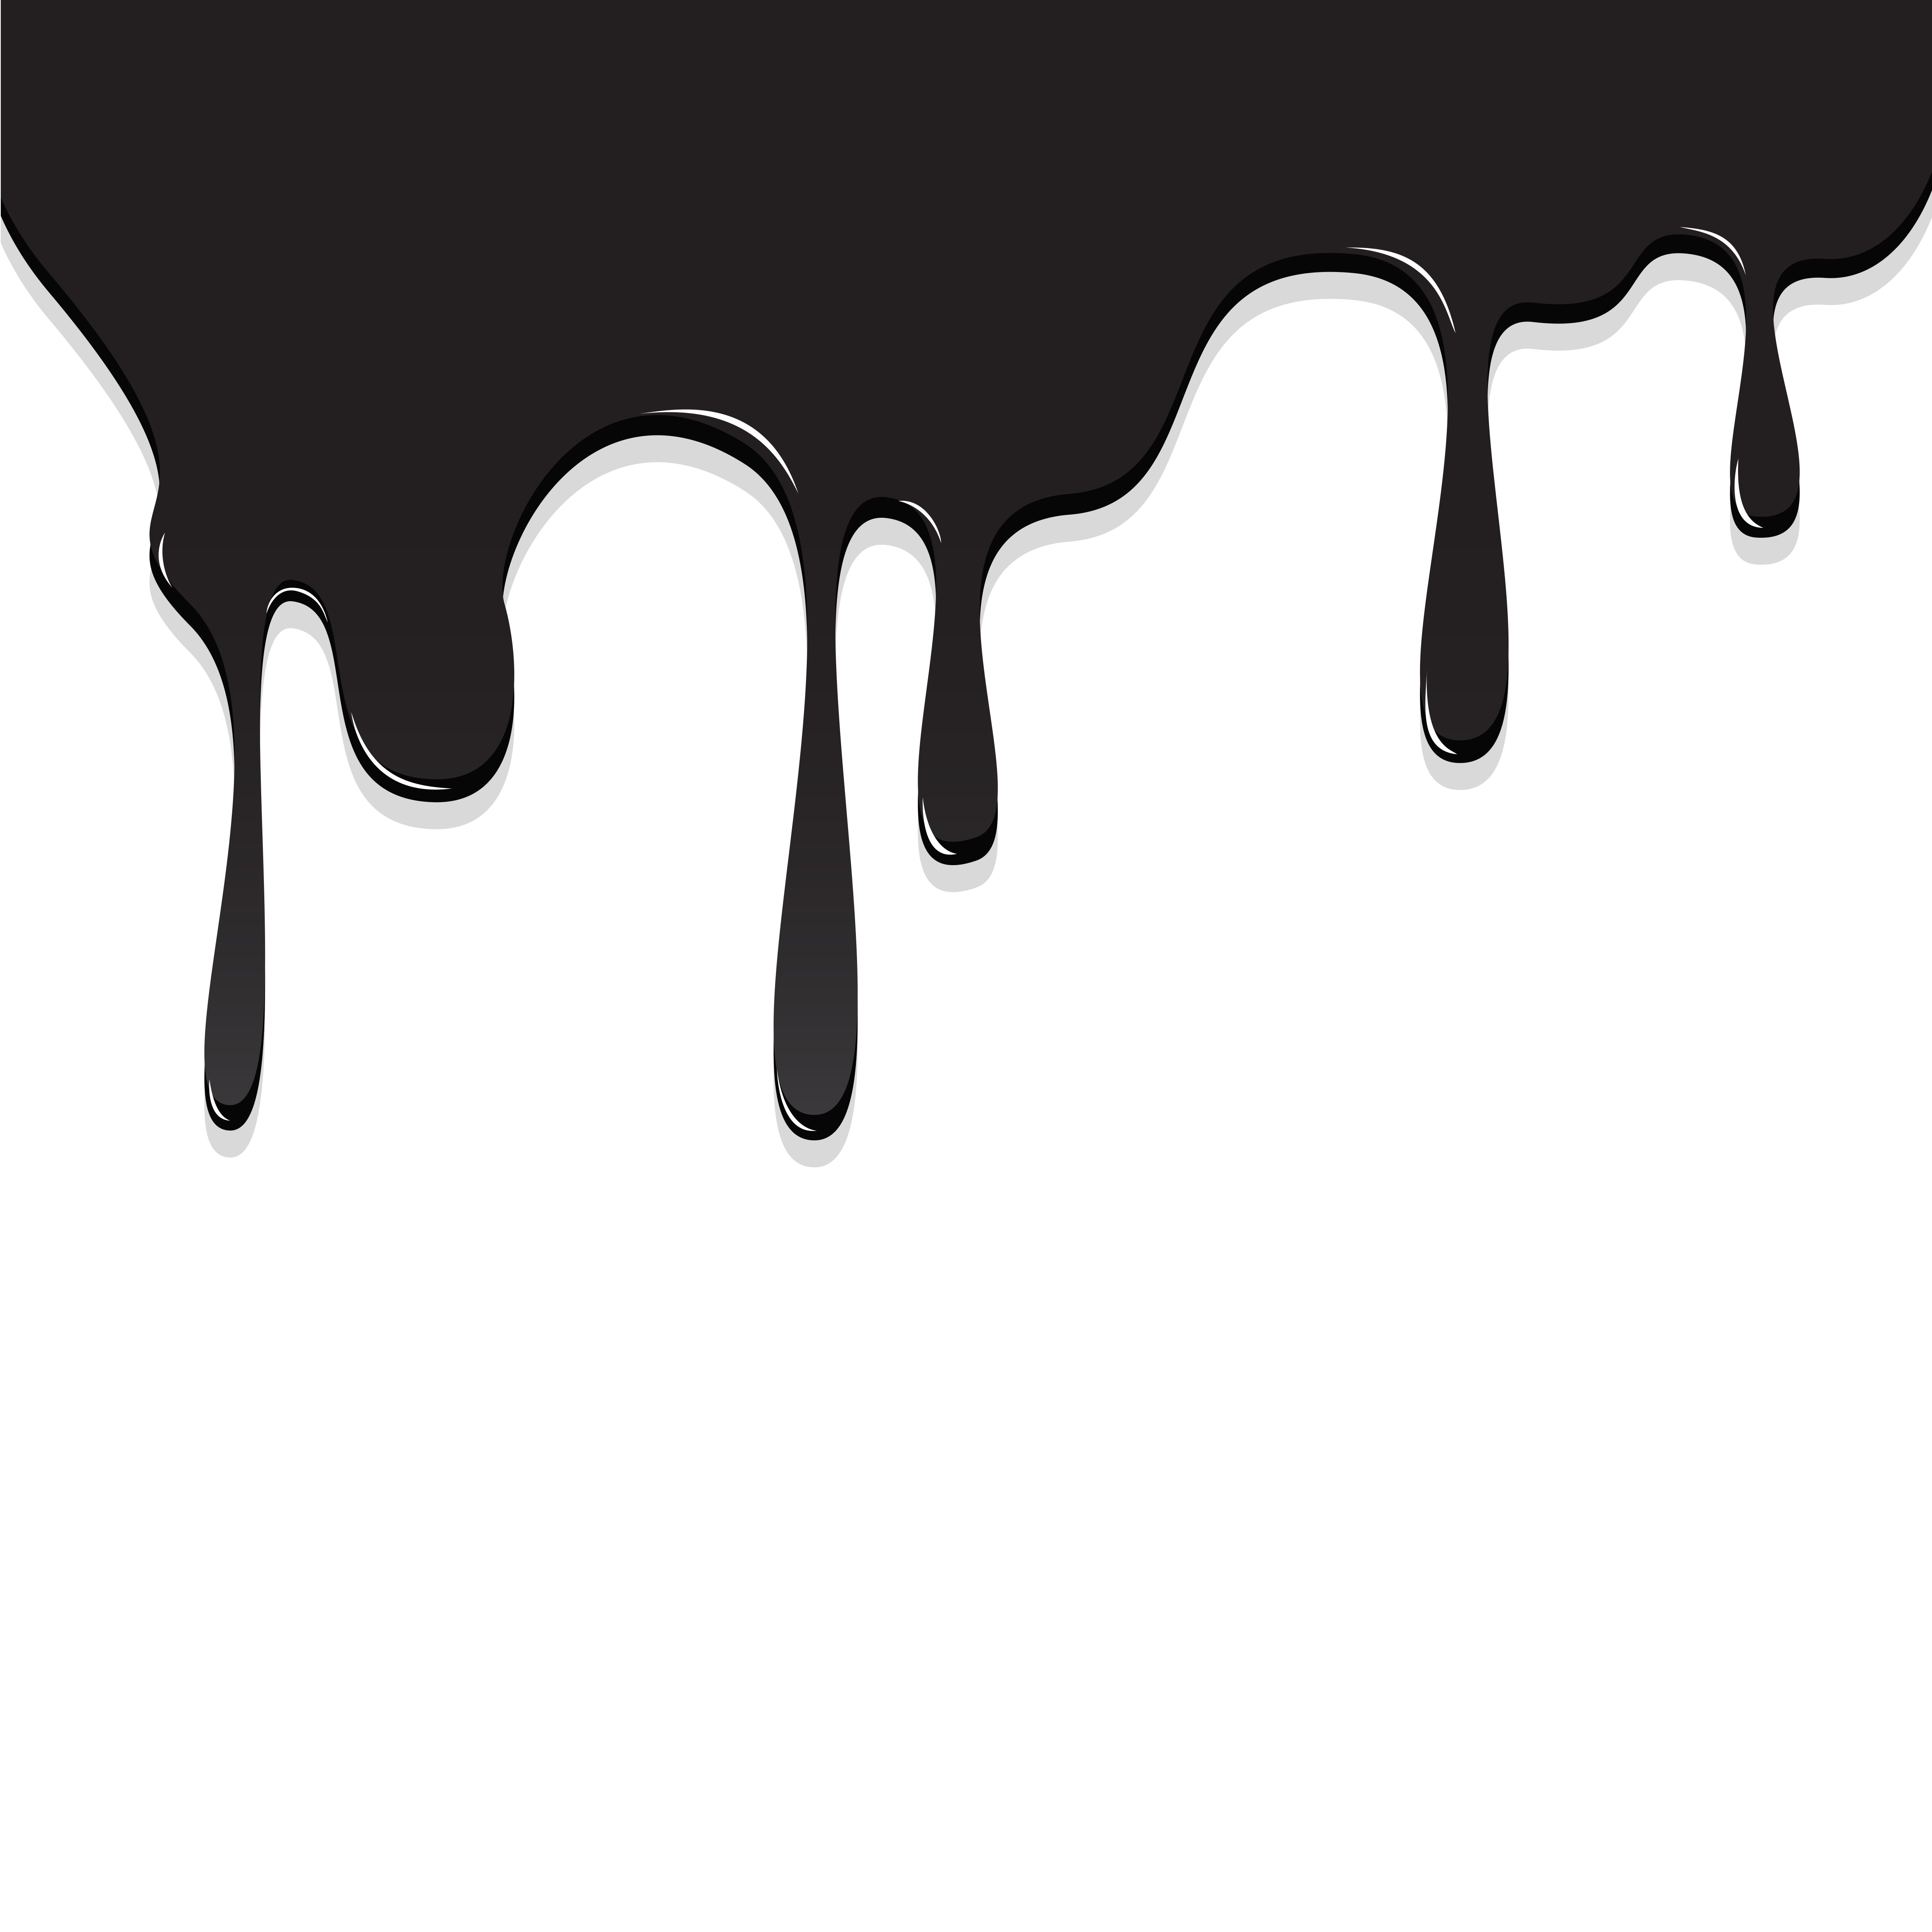 Download Paint Black color dripping, Color Droping Background illustration Vector Art. Choose from over a million fre. Dripping paint art, Drip art, Drip painting